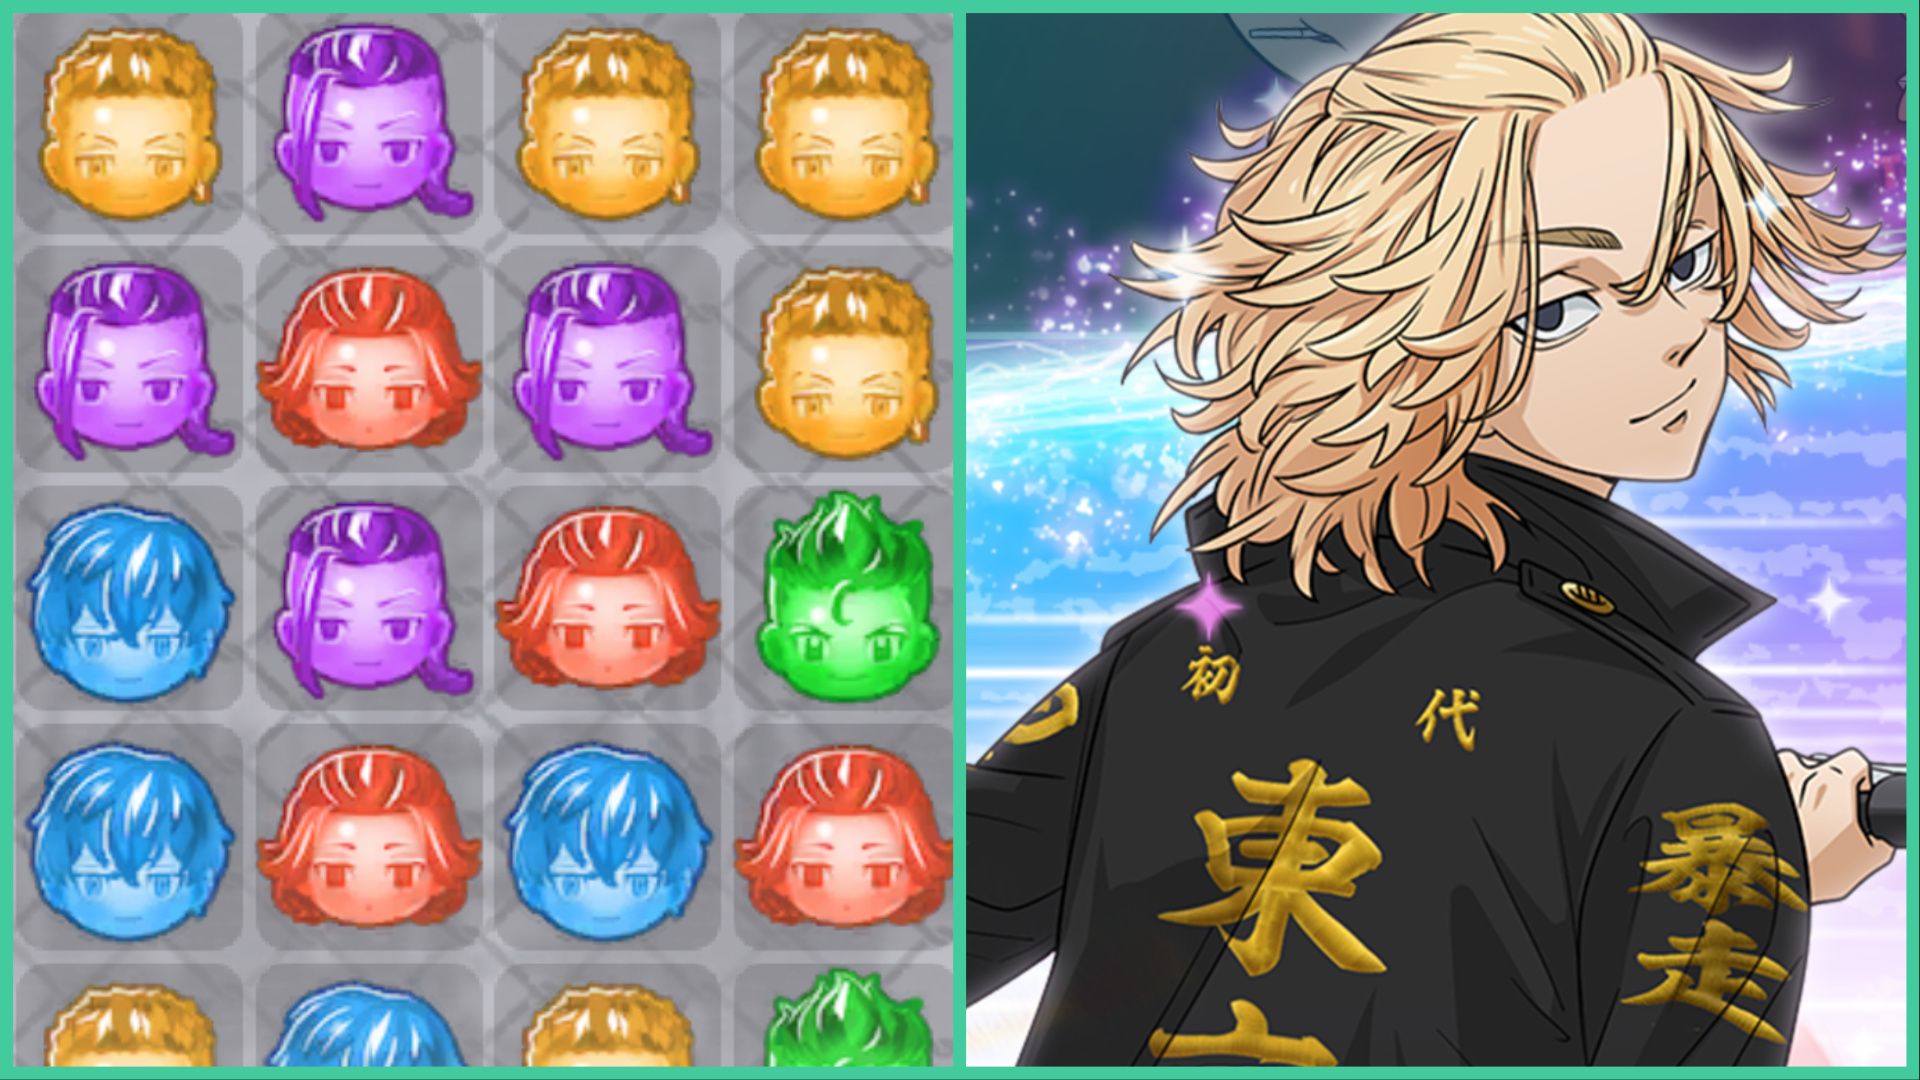 feature image for our tokyo revengers puzz reve codes, the image features a screenshot of the match-3 grid of the game with small chibi drawings of each character in blue, purple, red, green, and yellow, there is also a drawing of a character from tokyo revengers called mikey as he looks over his shoulder with his hand on a motorbike handle as he wears his jacket over his shoulders